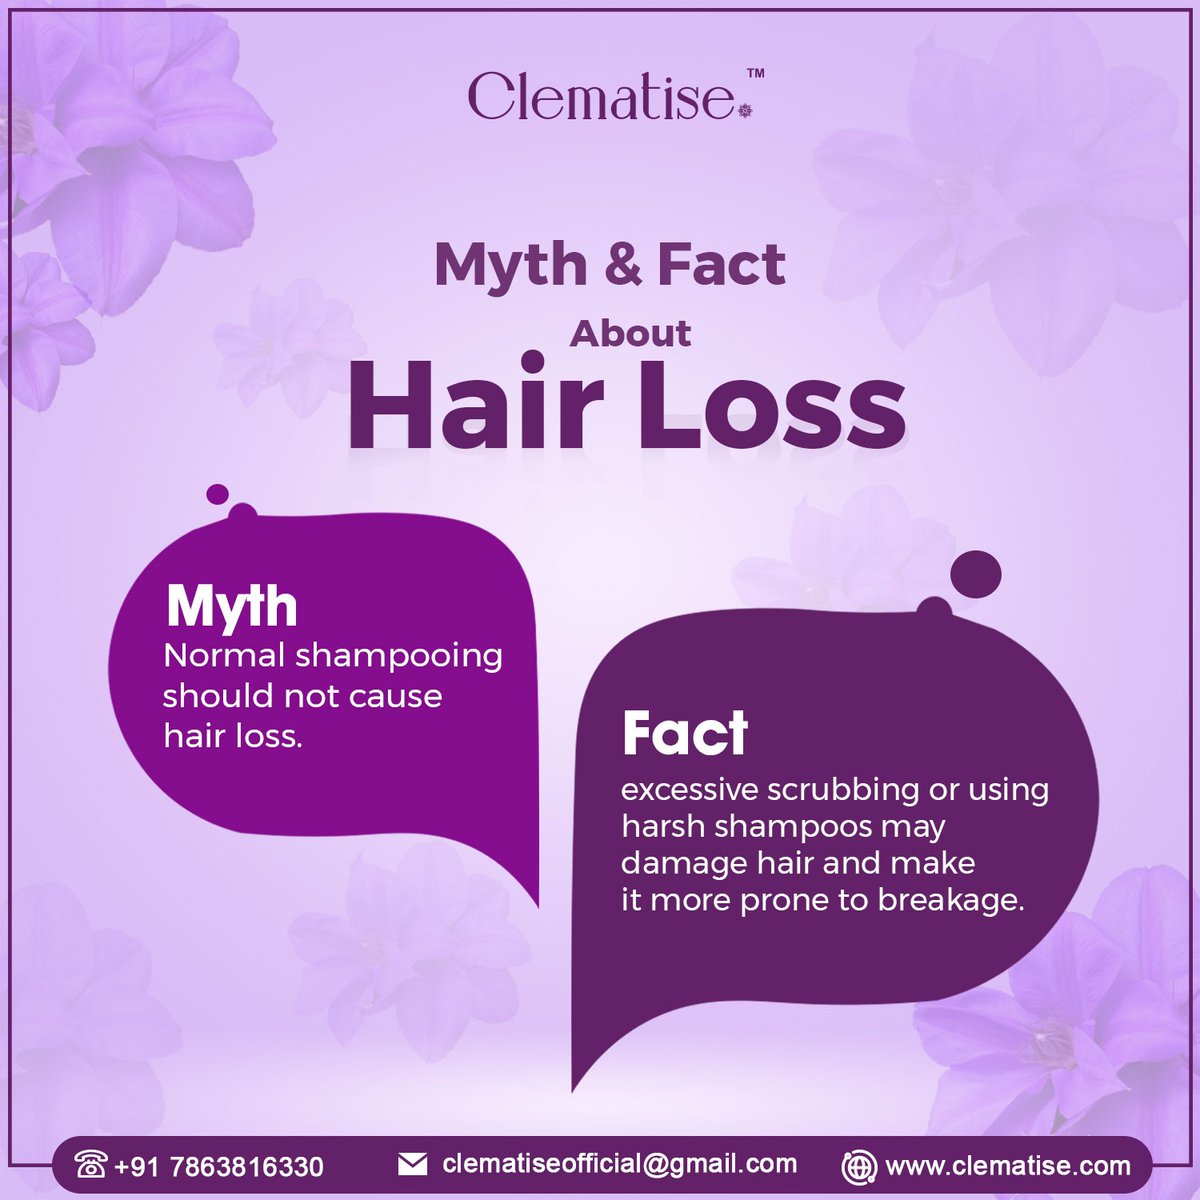 🎗️Certain myth and fact of excessive scrubbing that you need to be aware of! Because we care about you!💜
#clematisecosmetics #clematise #cosmeticbrand #FeelTheLuxury #onioncare #herbal #ubtanwash #trending #festivalseason #hairproducts #soft #skinproducts #haircare #skincare